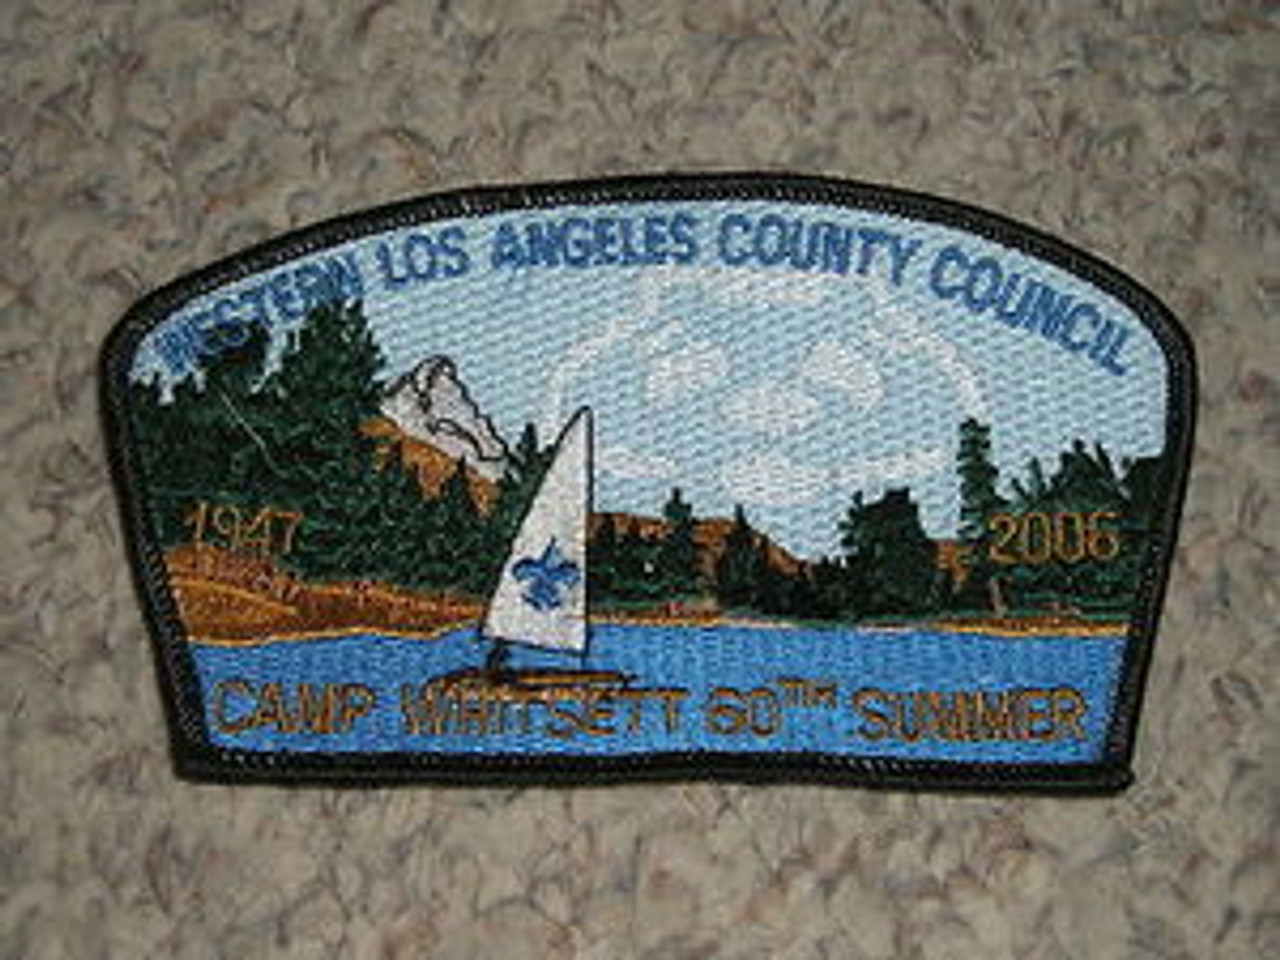 Western Los Angeles County Council sa20 CSP - 2006 Camp Whitsett Commemorative 60th Anniversary